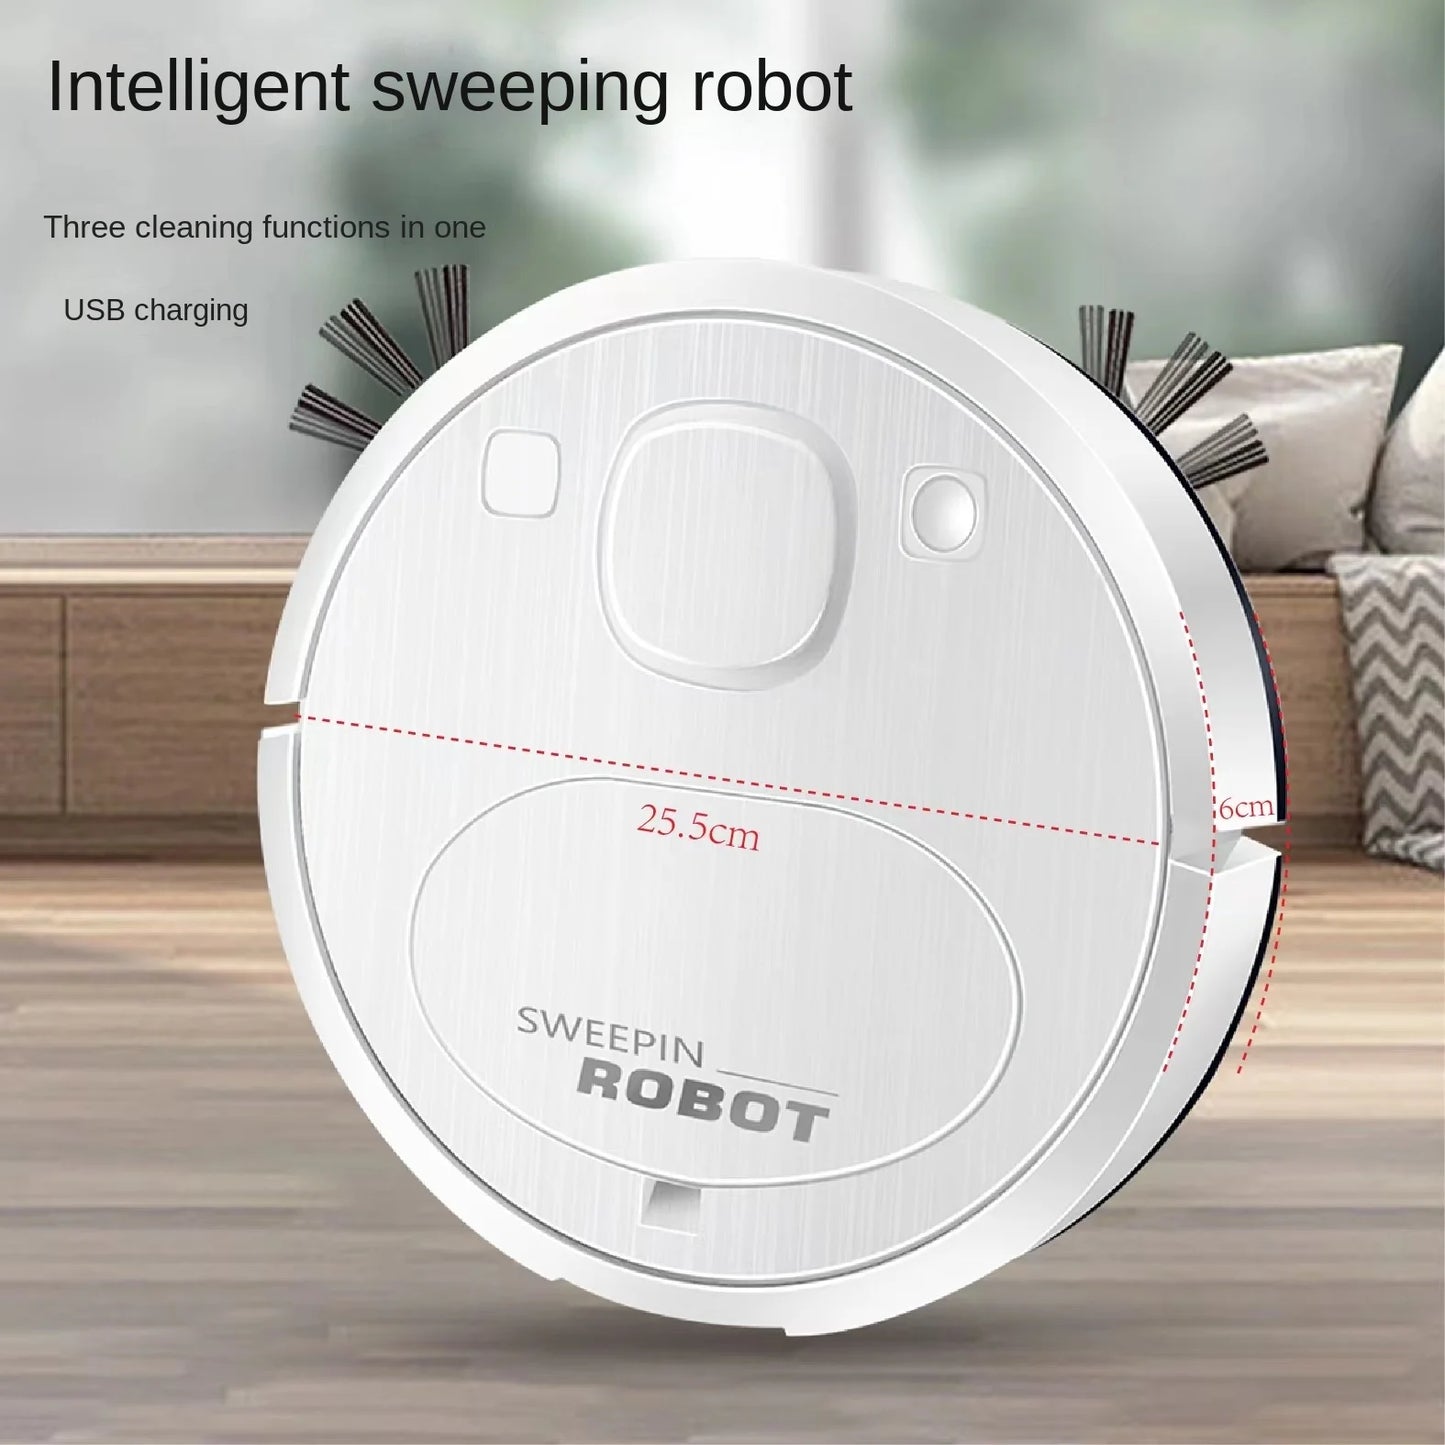 Robot Cleaner Sweeping Suction Mopping Machine
Kitchen Robot Electric Mop Home Appliance